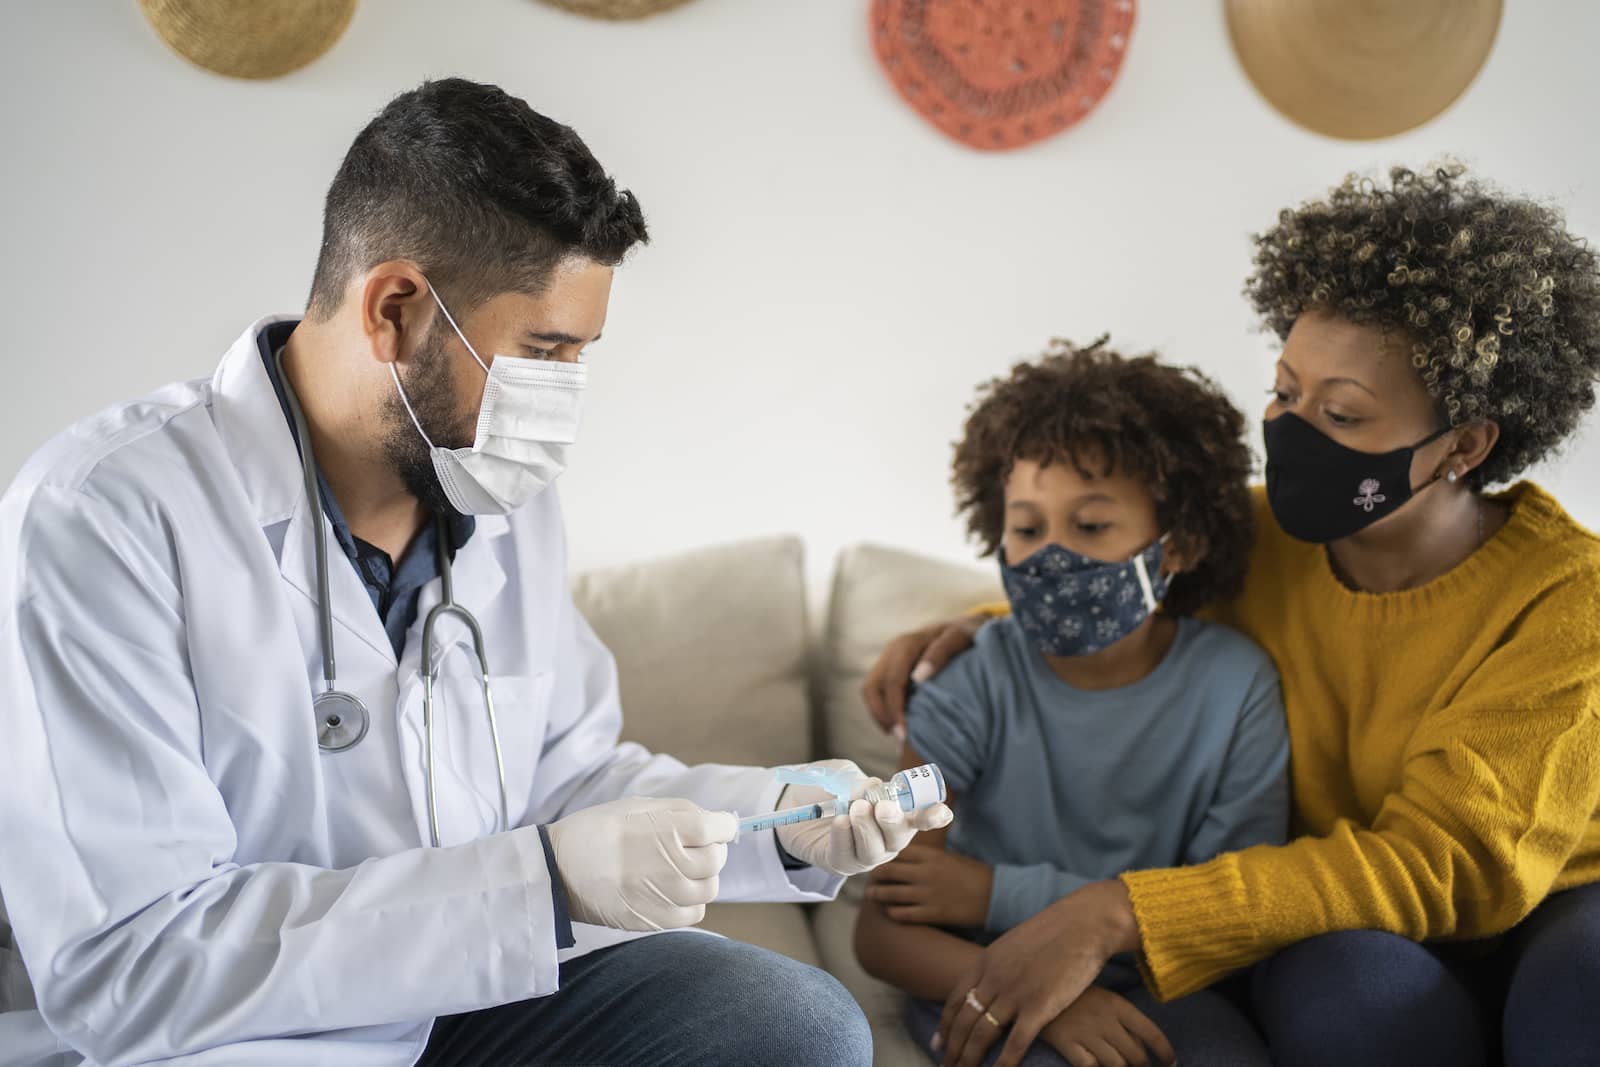 COVID-19 Vaccines for Kids: 5 Things Parents and Guardians Should Know